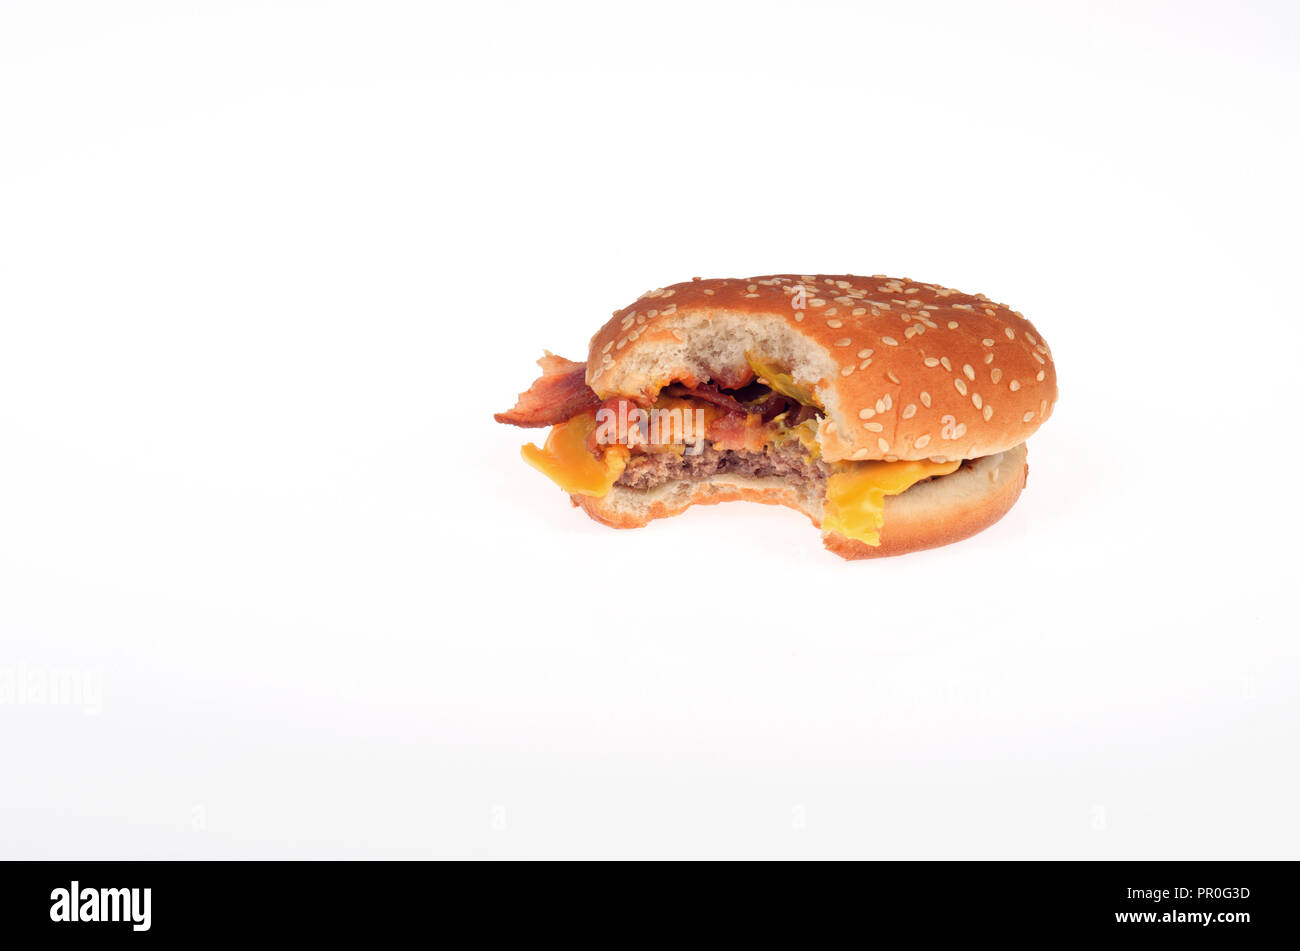 McDonalds Bacon cheeseburger with a bite taken out on white background Stock Photo